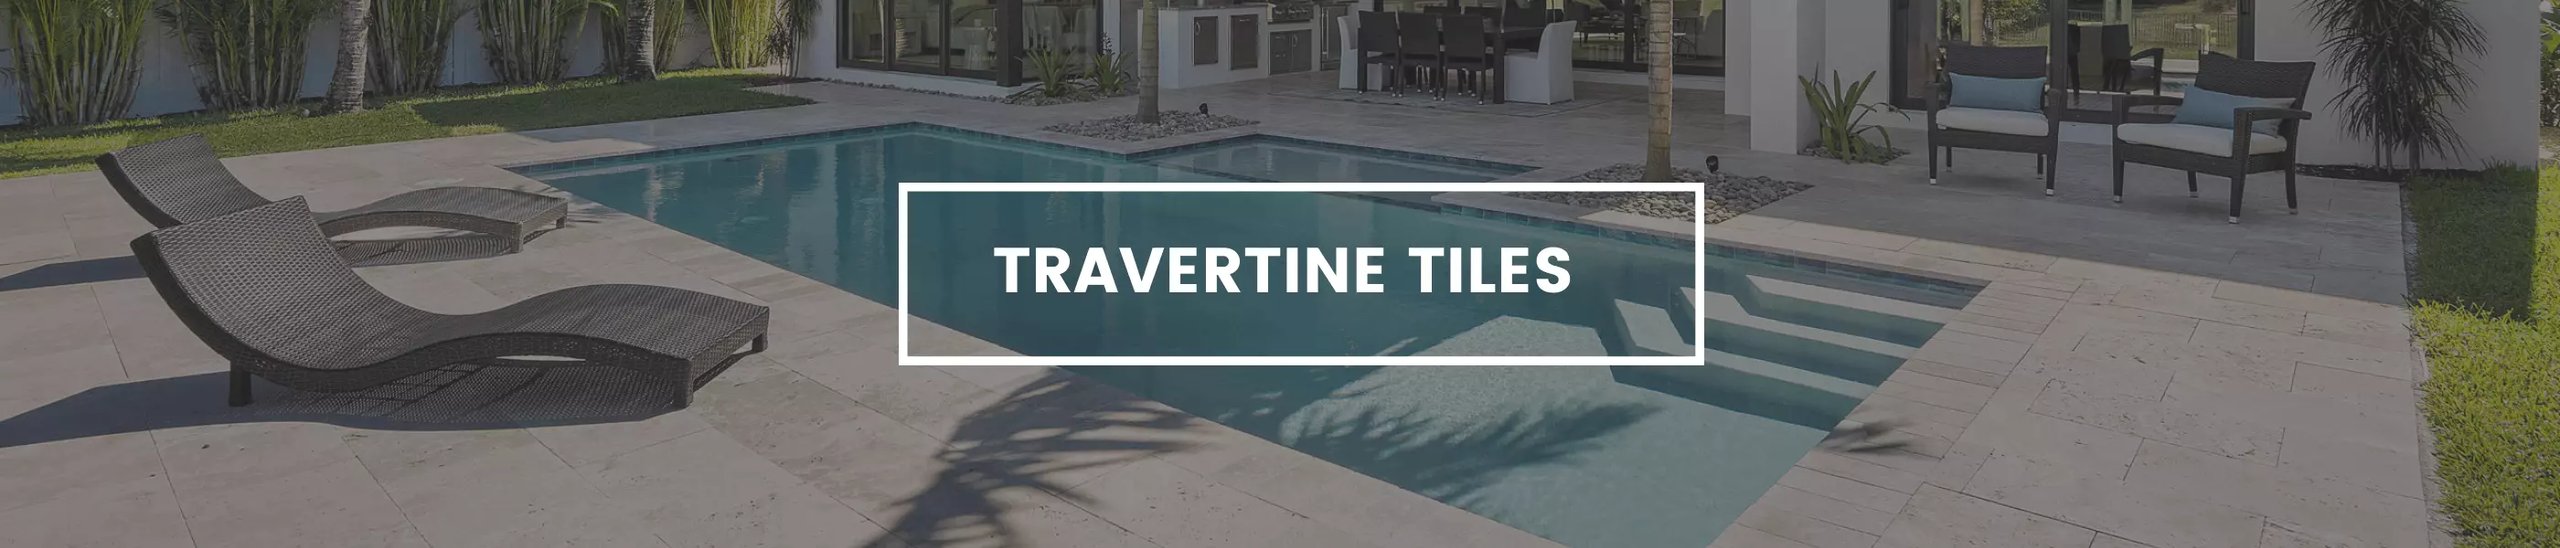 Travertine tiles banner, with travertine pavers around a pool.